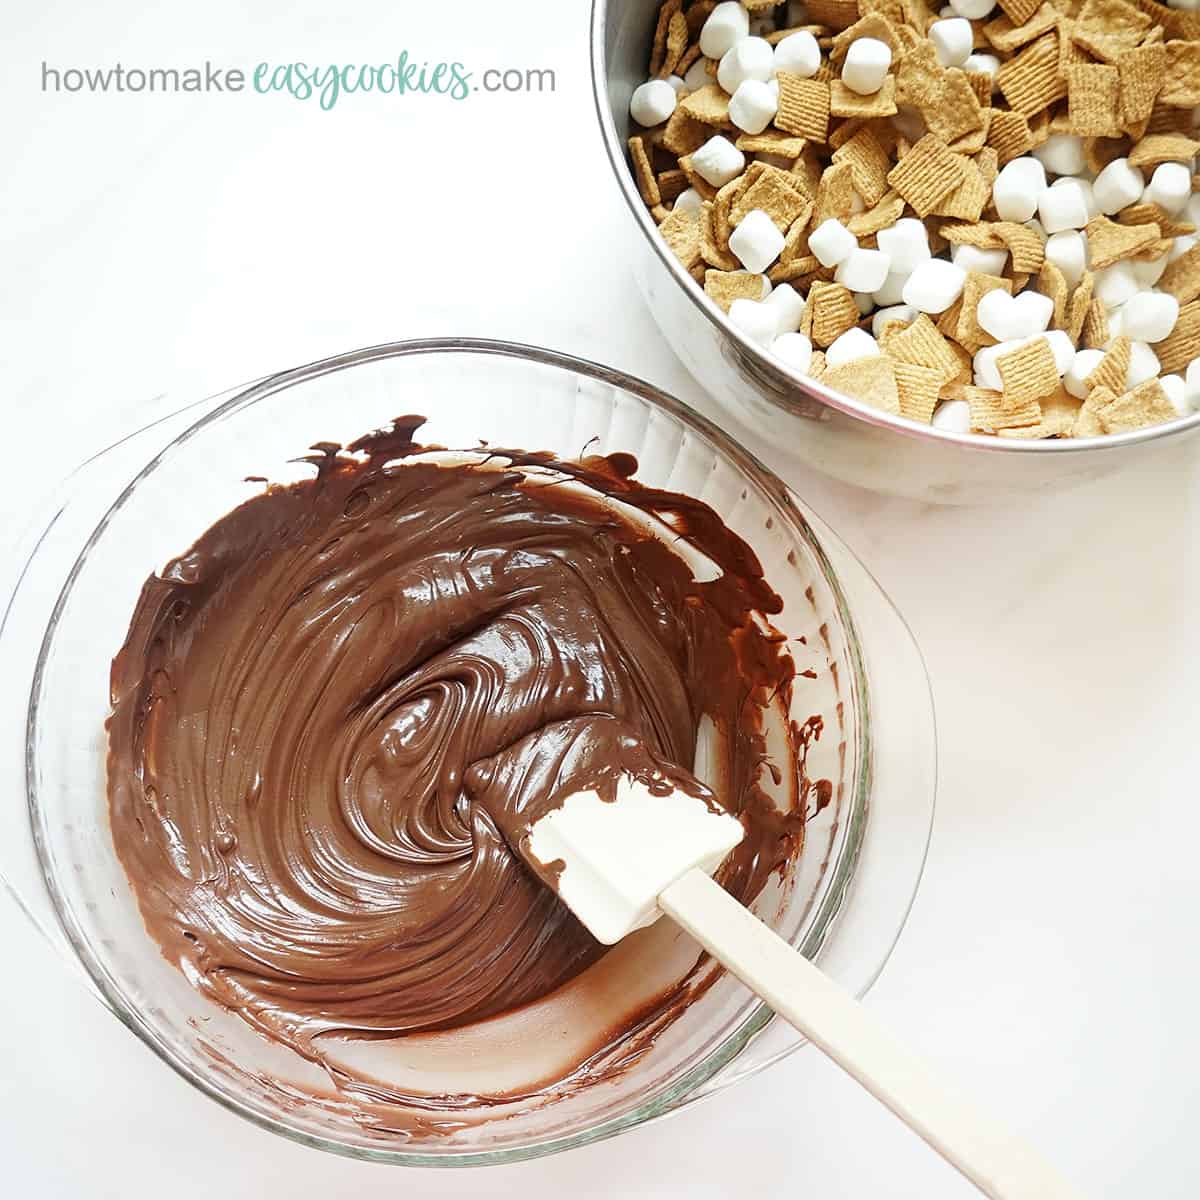 melted chocolate to stir into Golden Grahams cereal and mini marshmallows